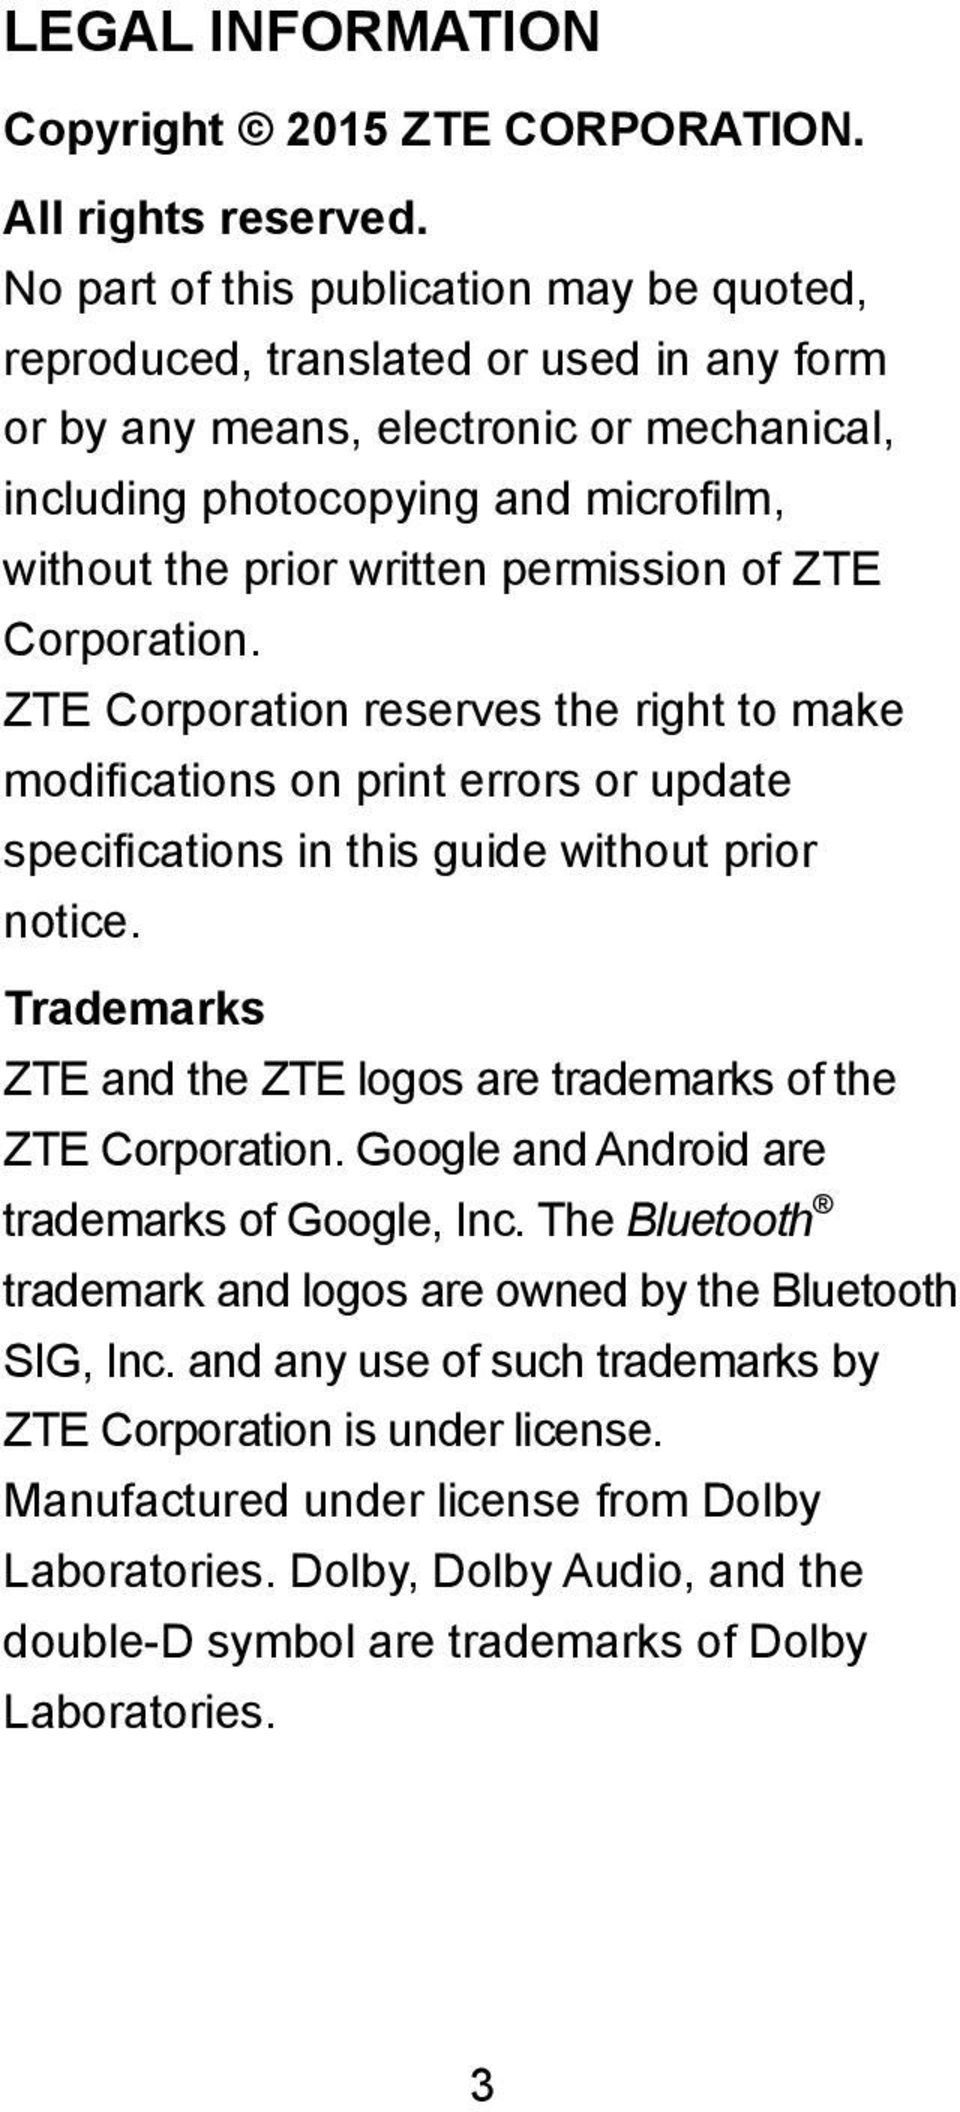 permission of ZTE Corporation. ZTE Corporation reserves the right to make modifications on print errors or update specifications in this guide without prior notice.